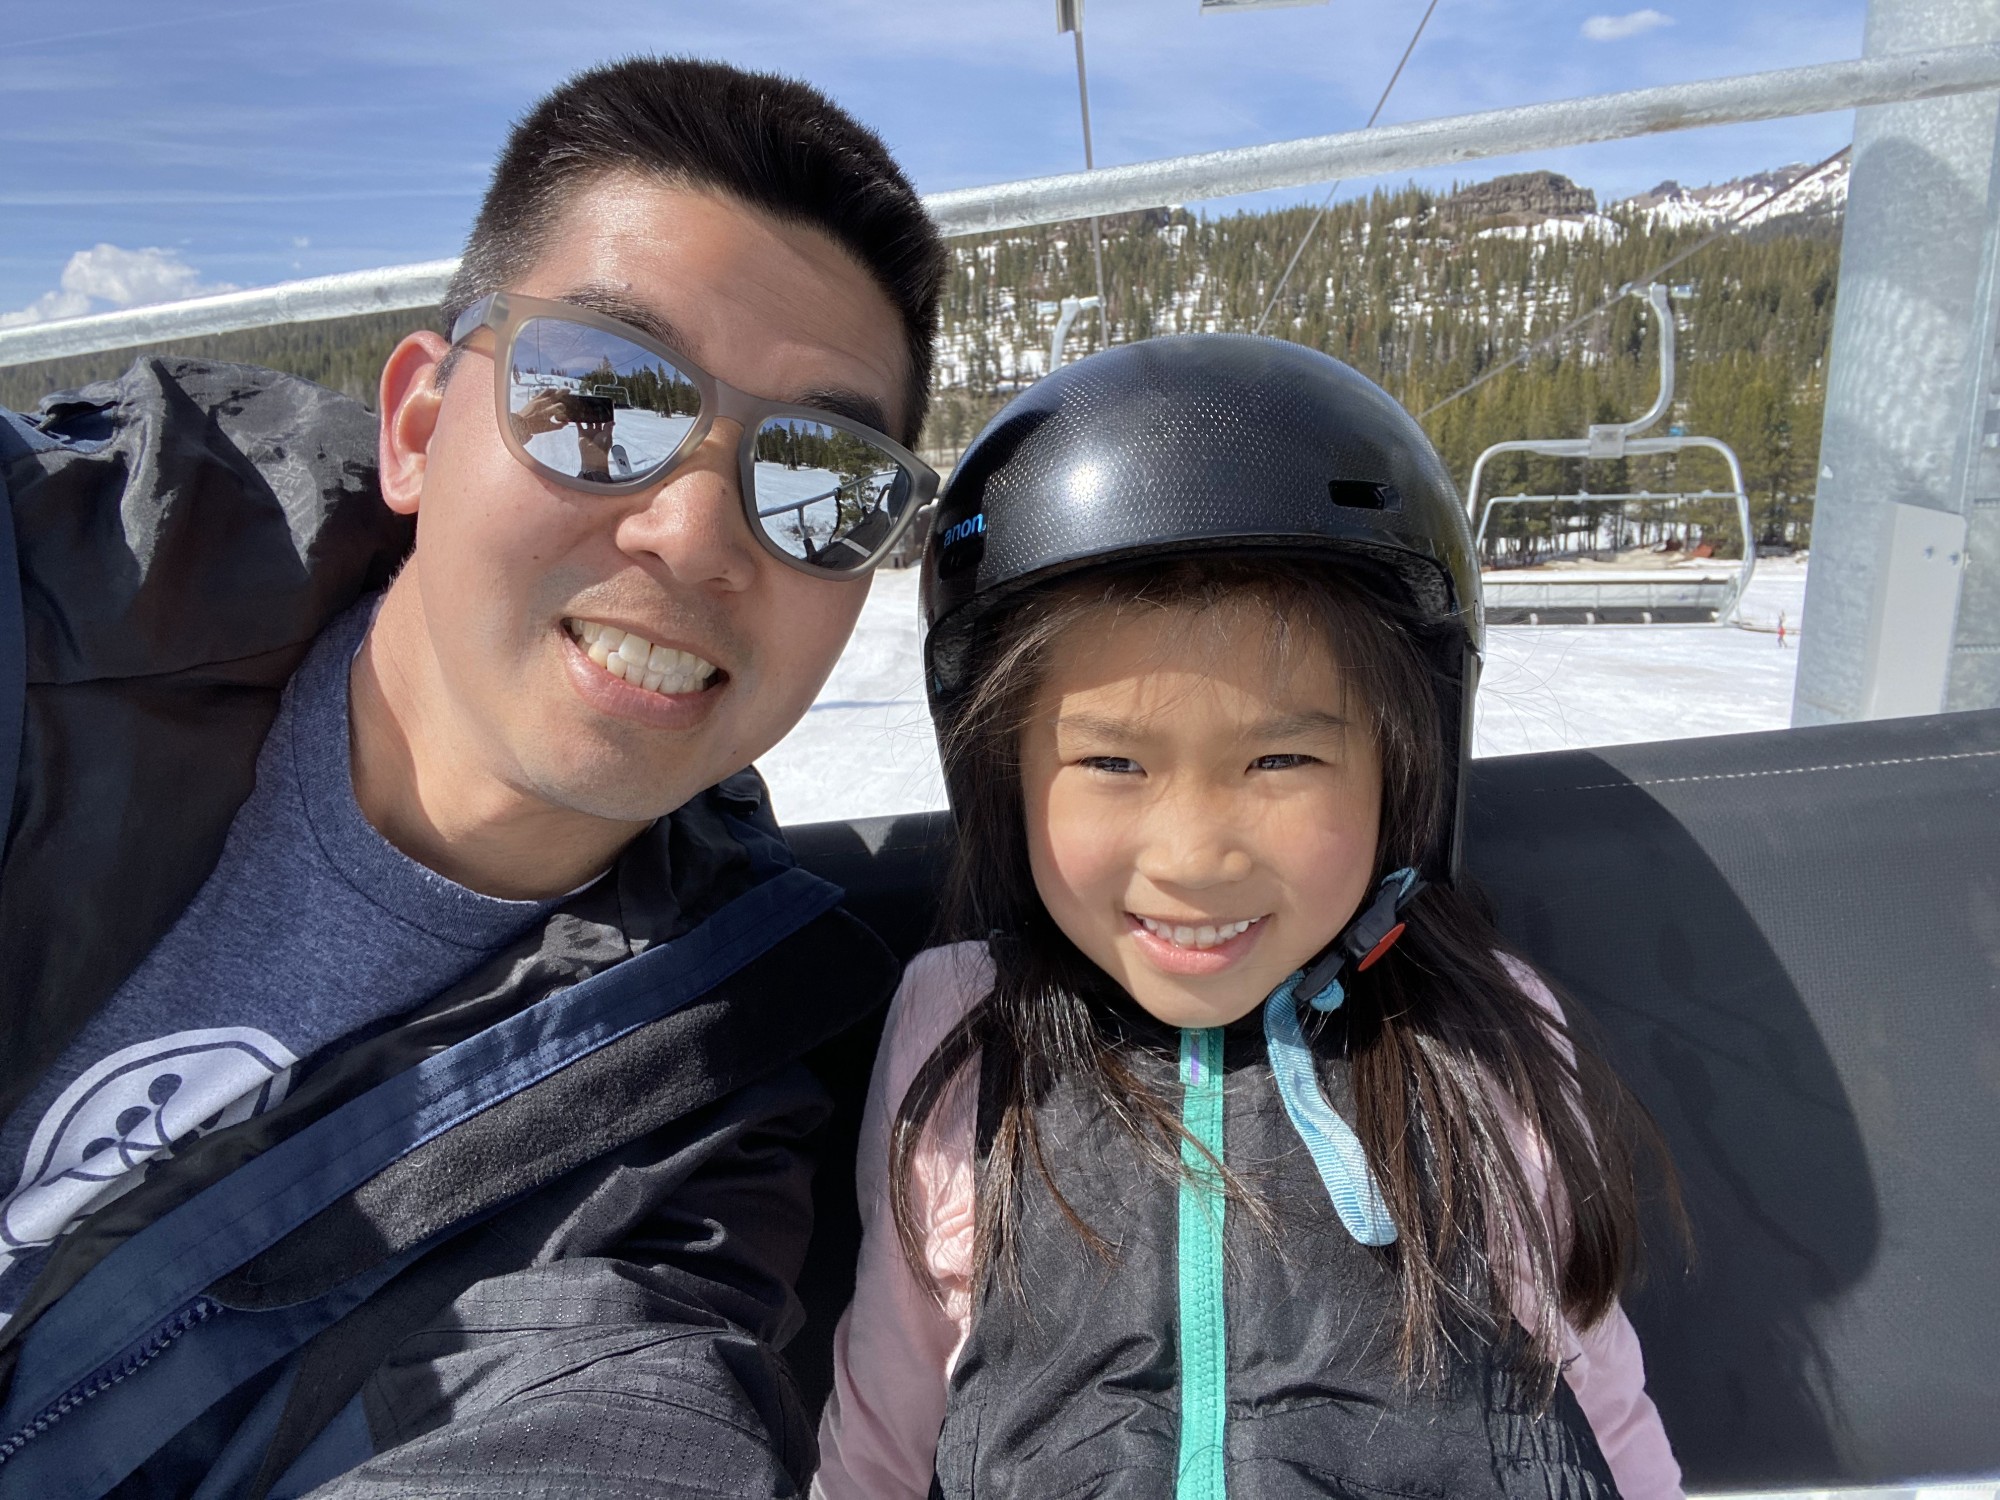 Daddy and Kayli look awesome on the ski lift!